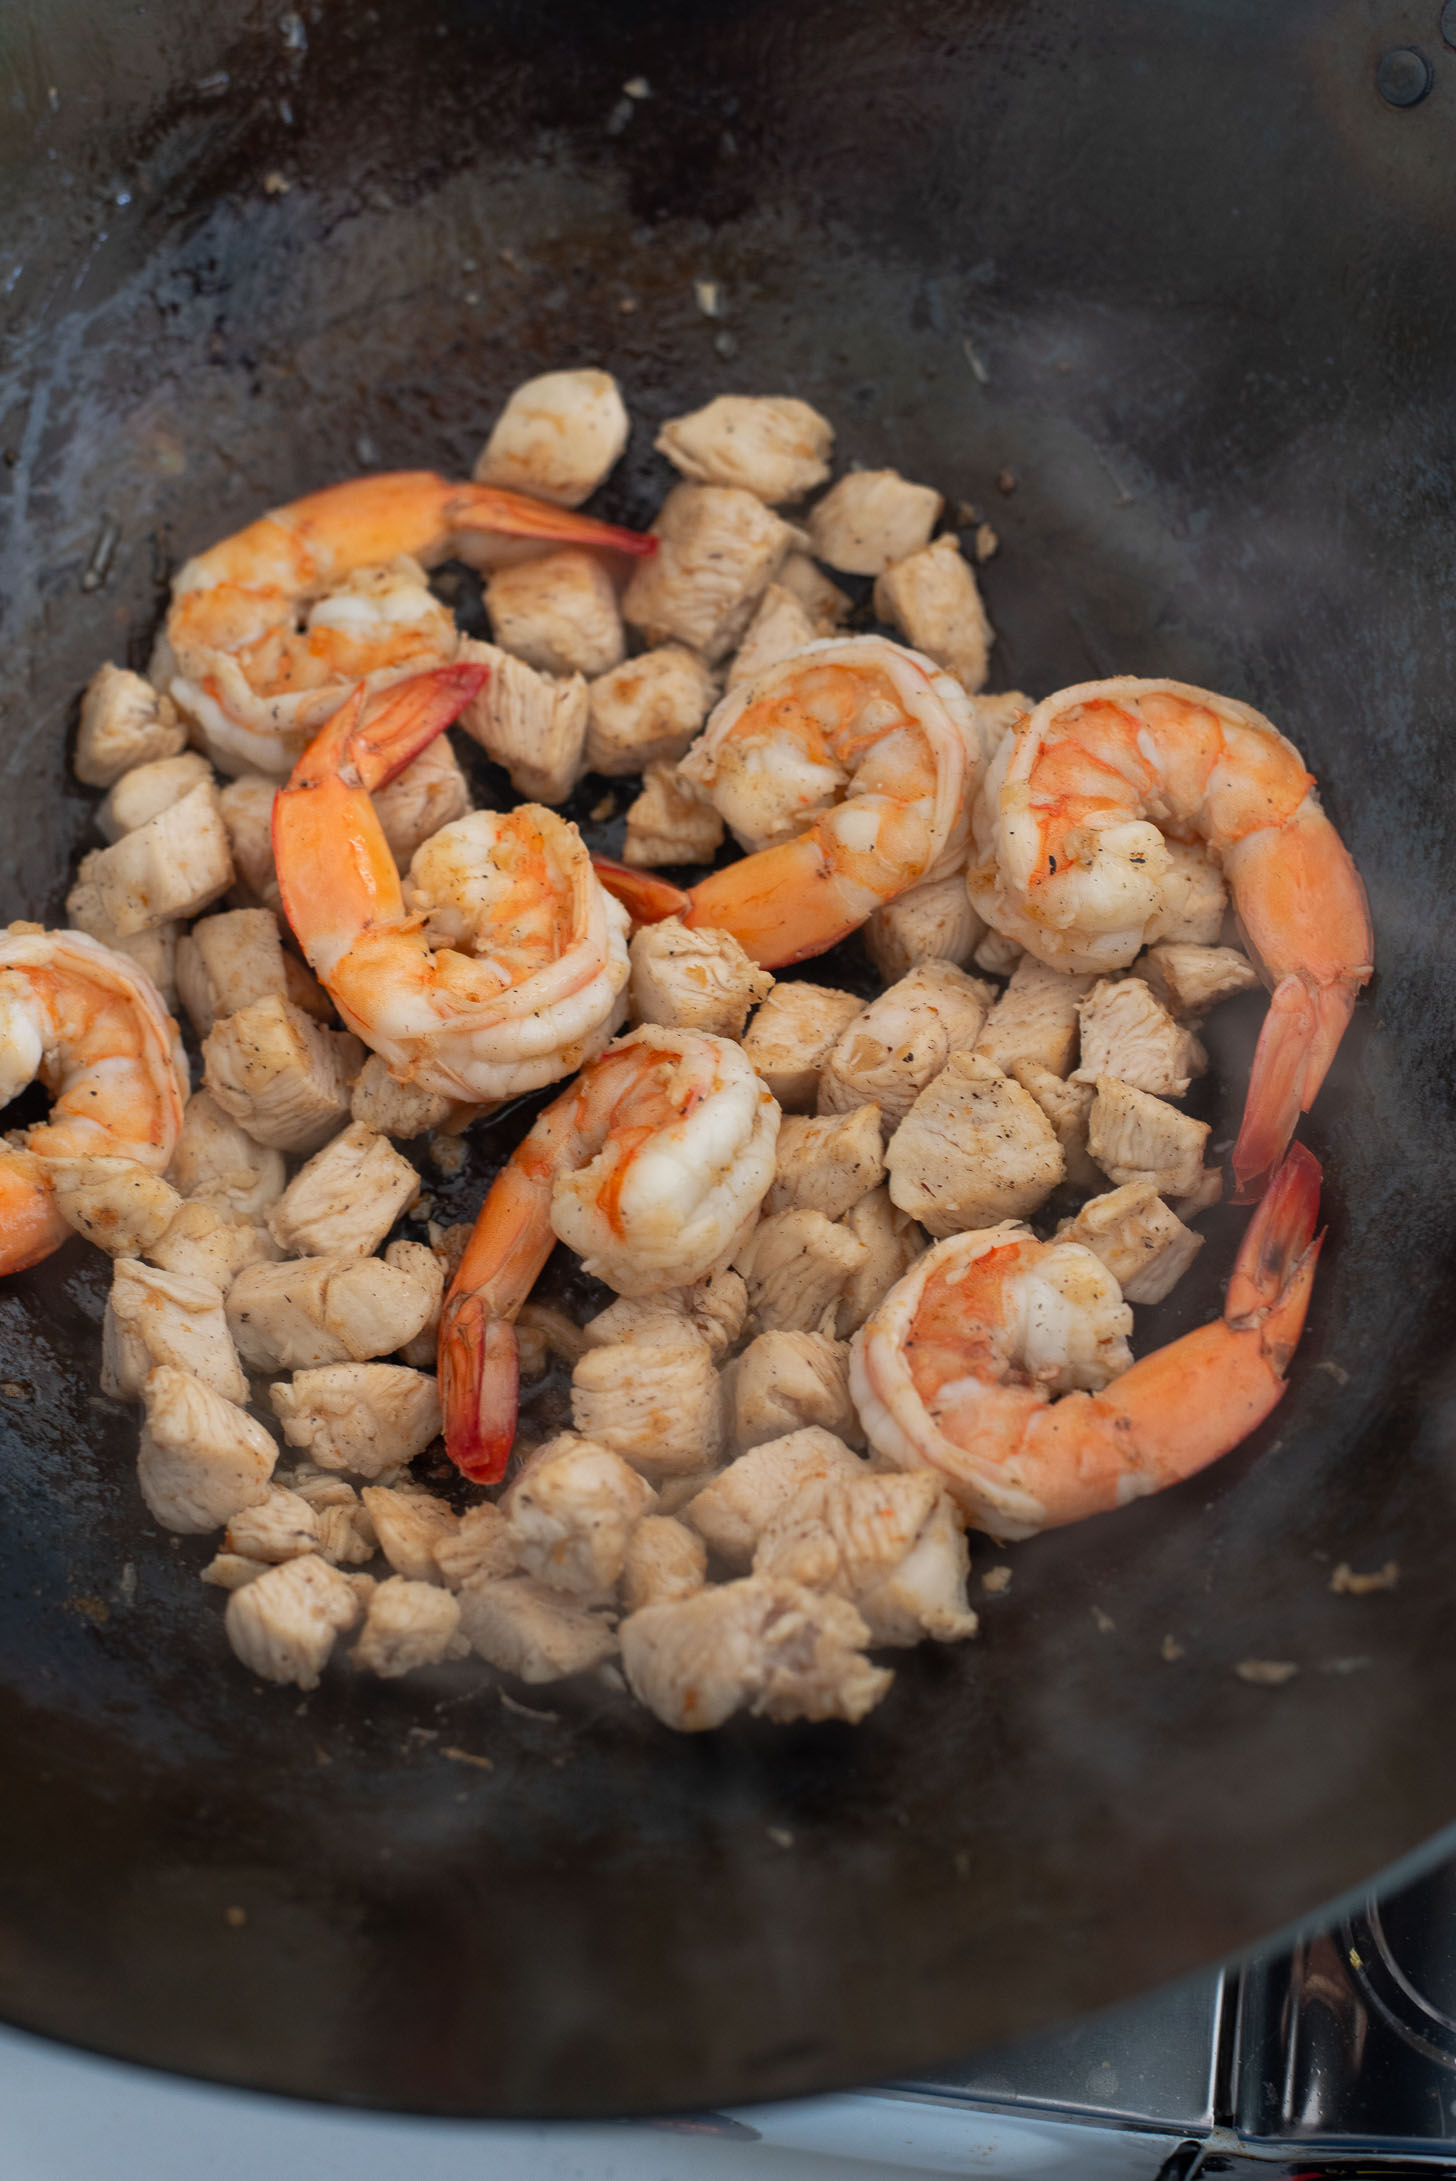 Chicken and shrimp are stir fried in a wok.